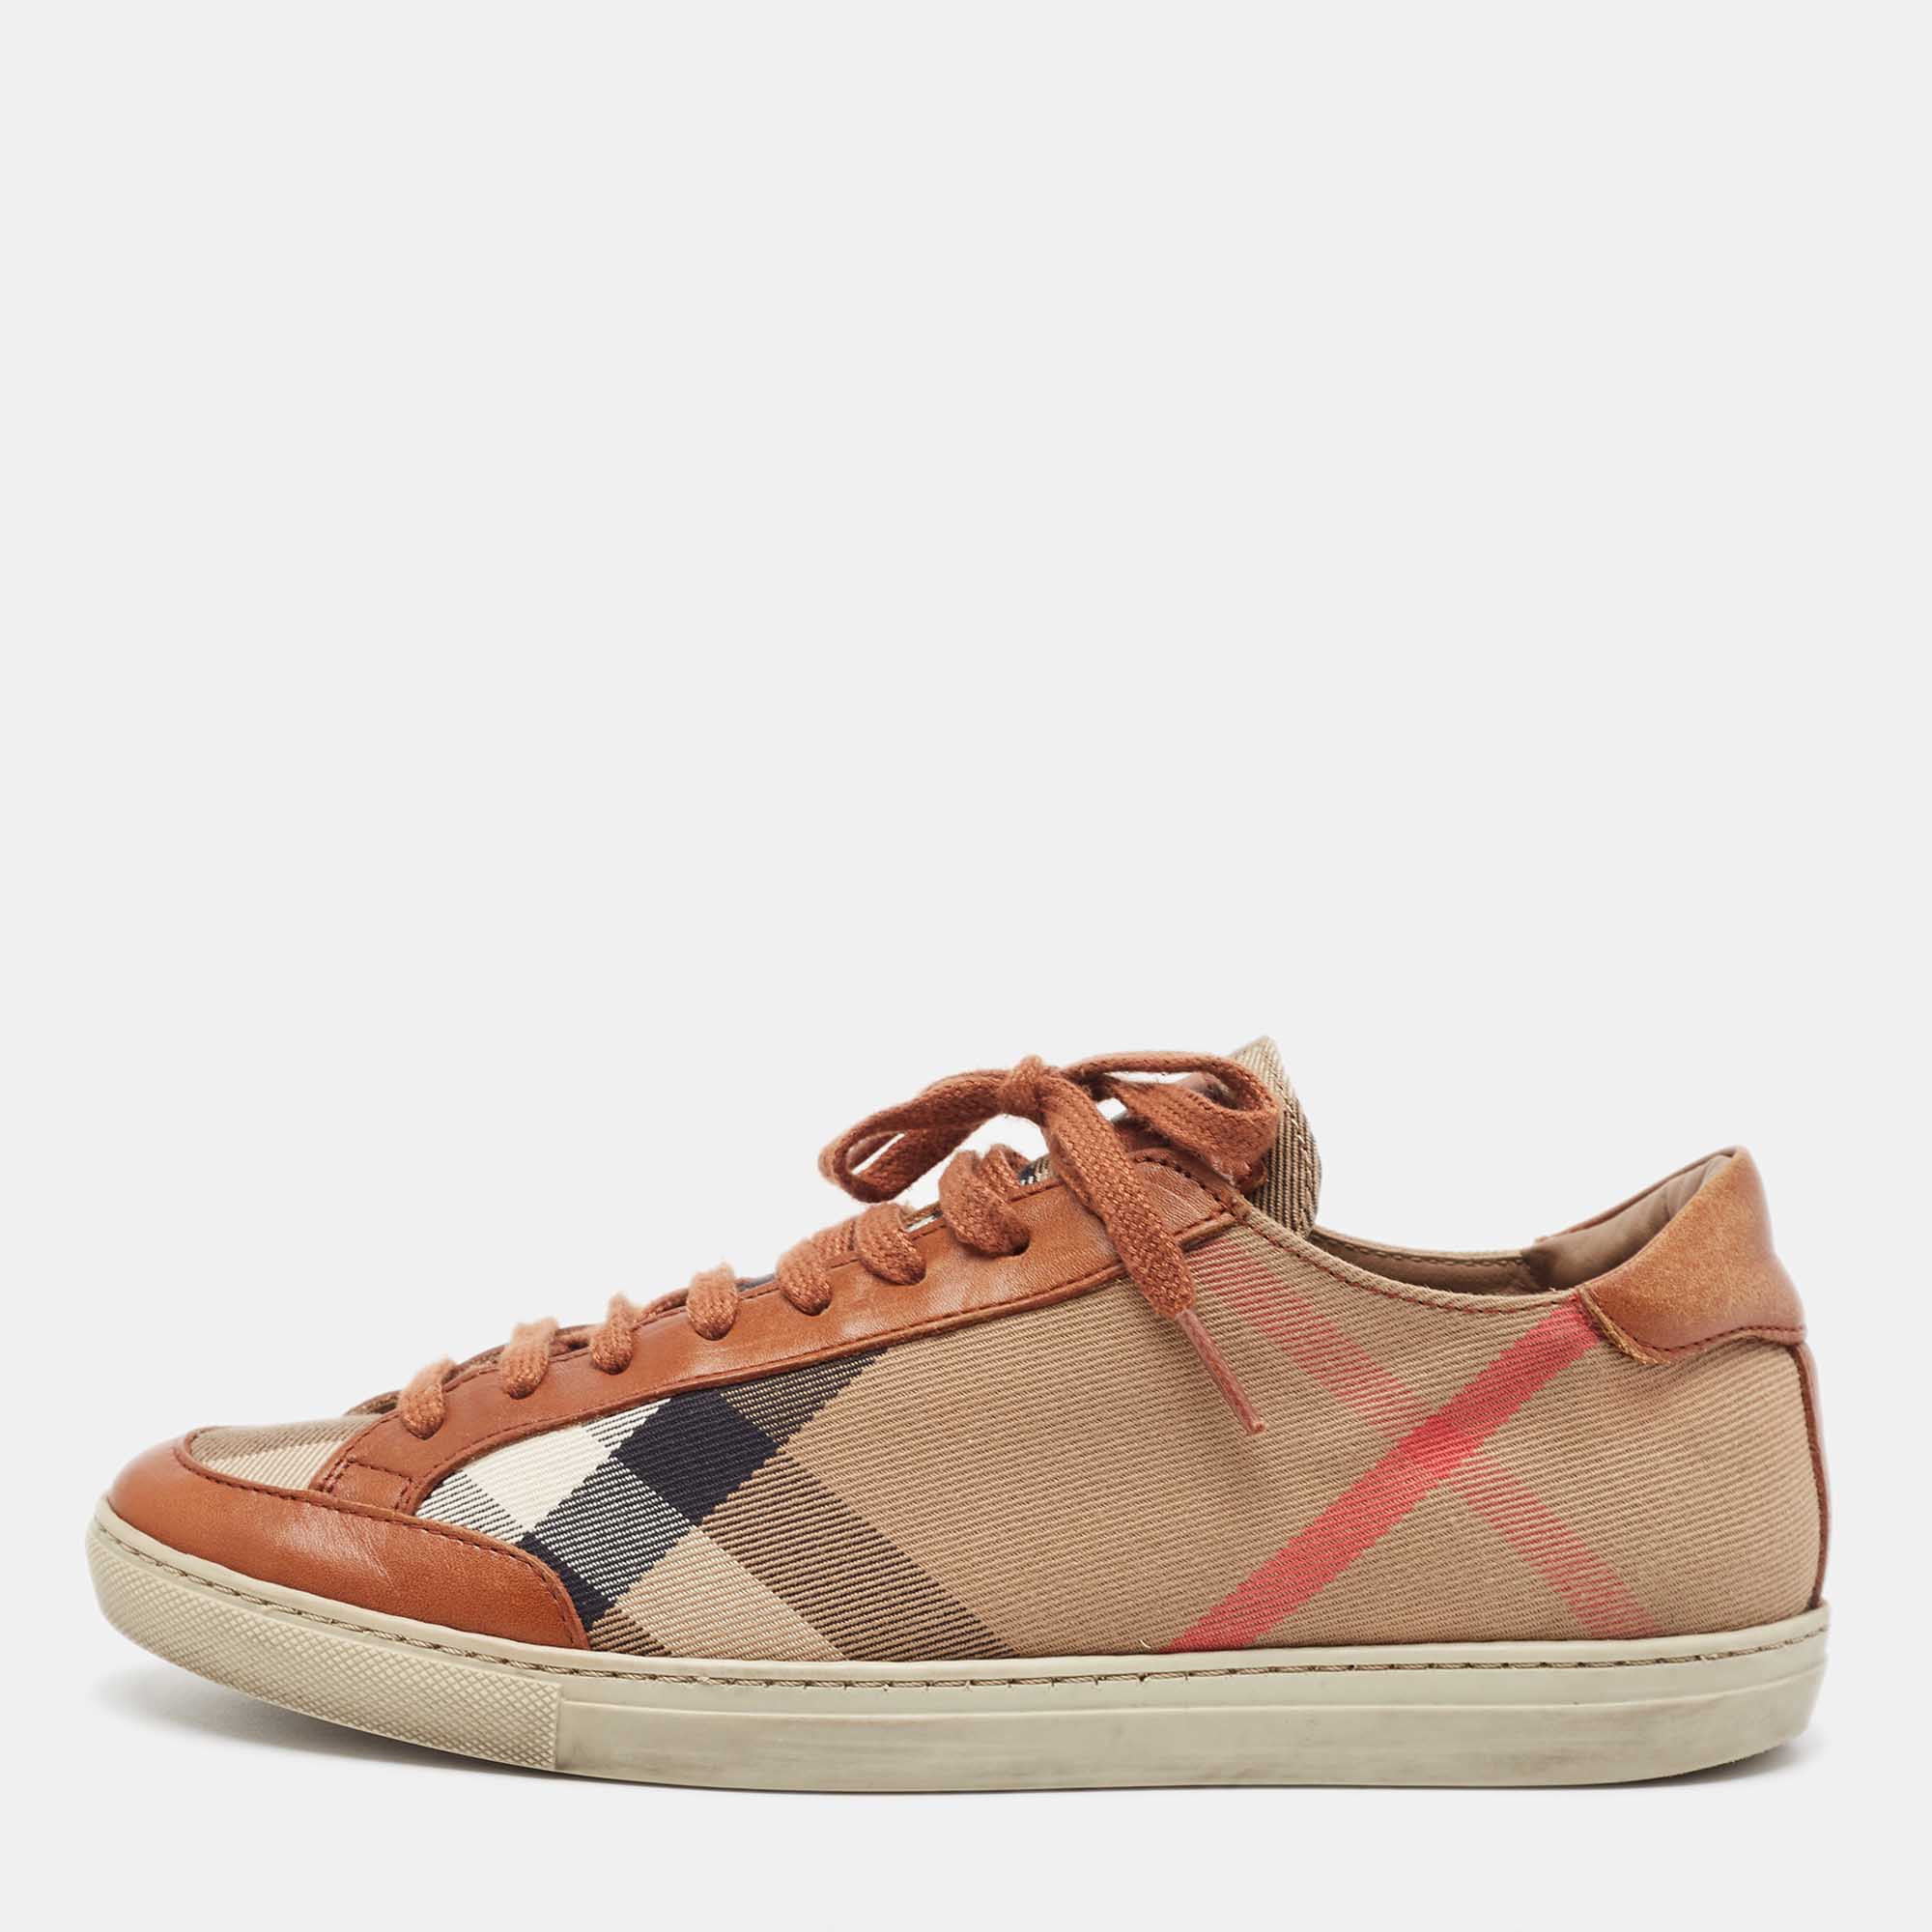 

Burberry Brown/Beige Nova Check Canvas and Leather Lace Up Sneakers Size